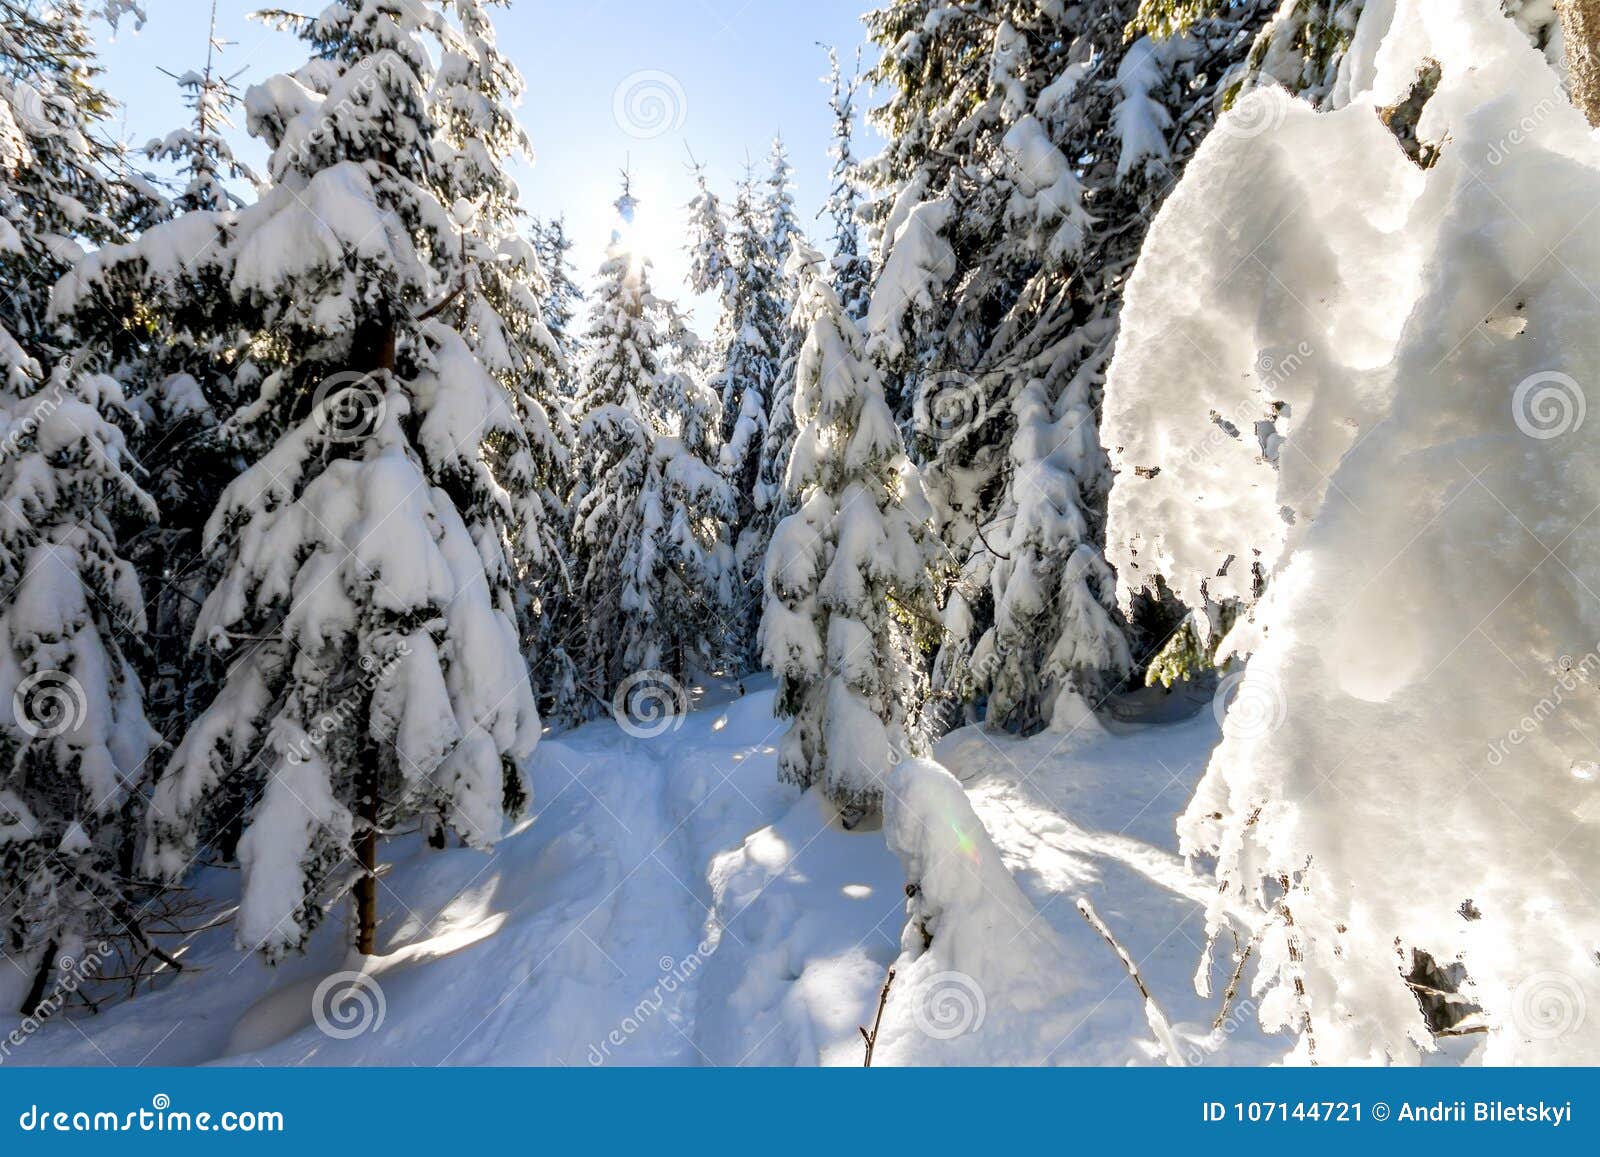 Snow Covered Pine Trees In Carpathian Mountains In Winter ...